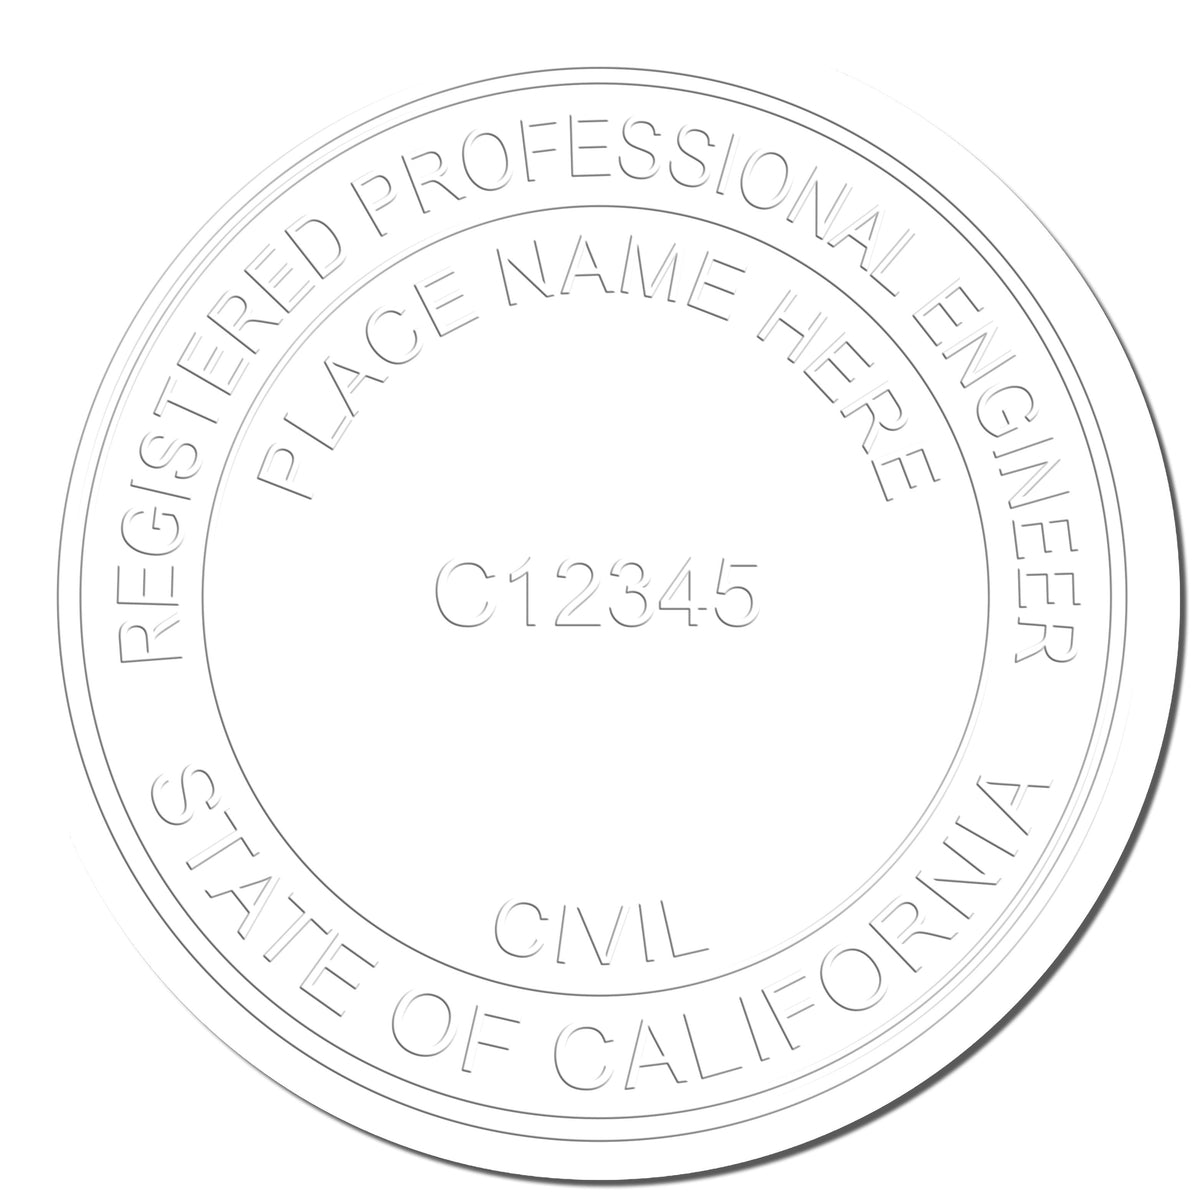 This paper is stamped with a sample imprint of the Heavy Duty Cast Iron California Engineer Seal Embosser, signifying its quality and reliability.